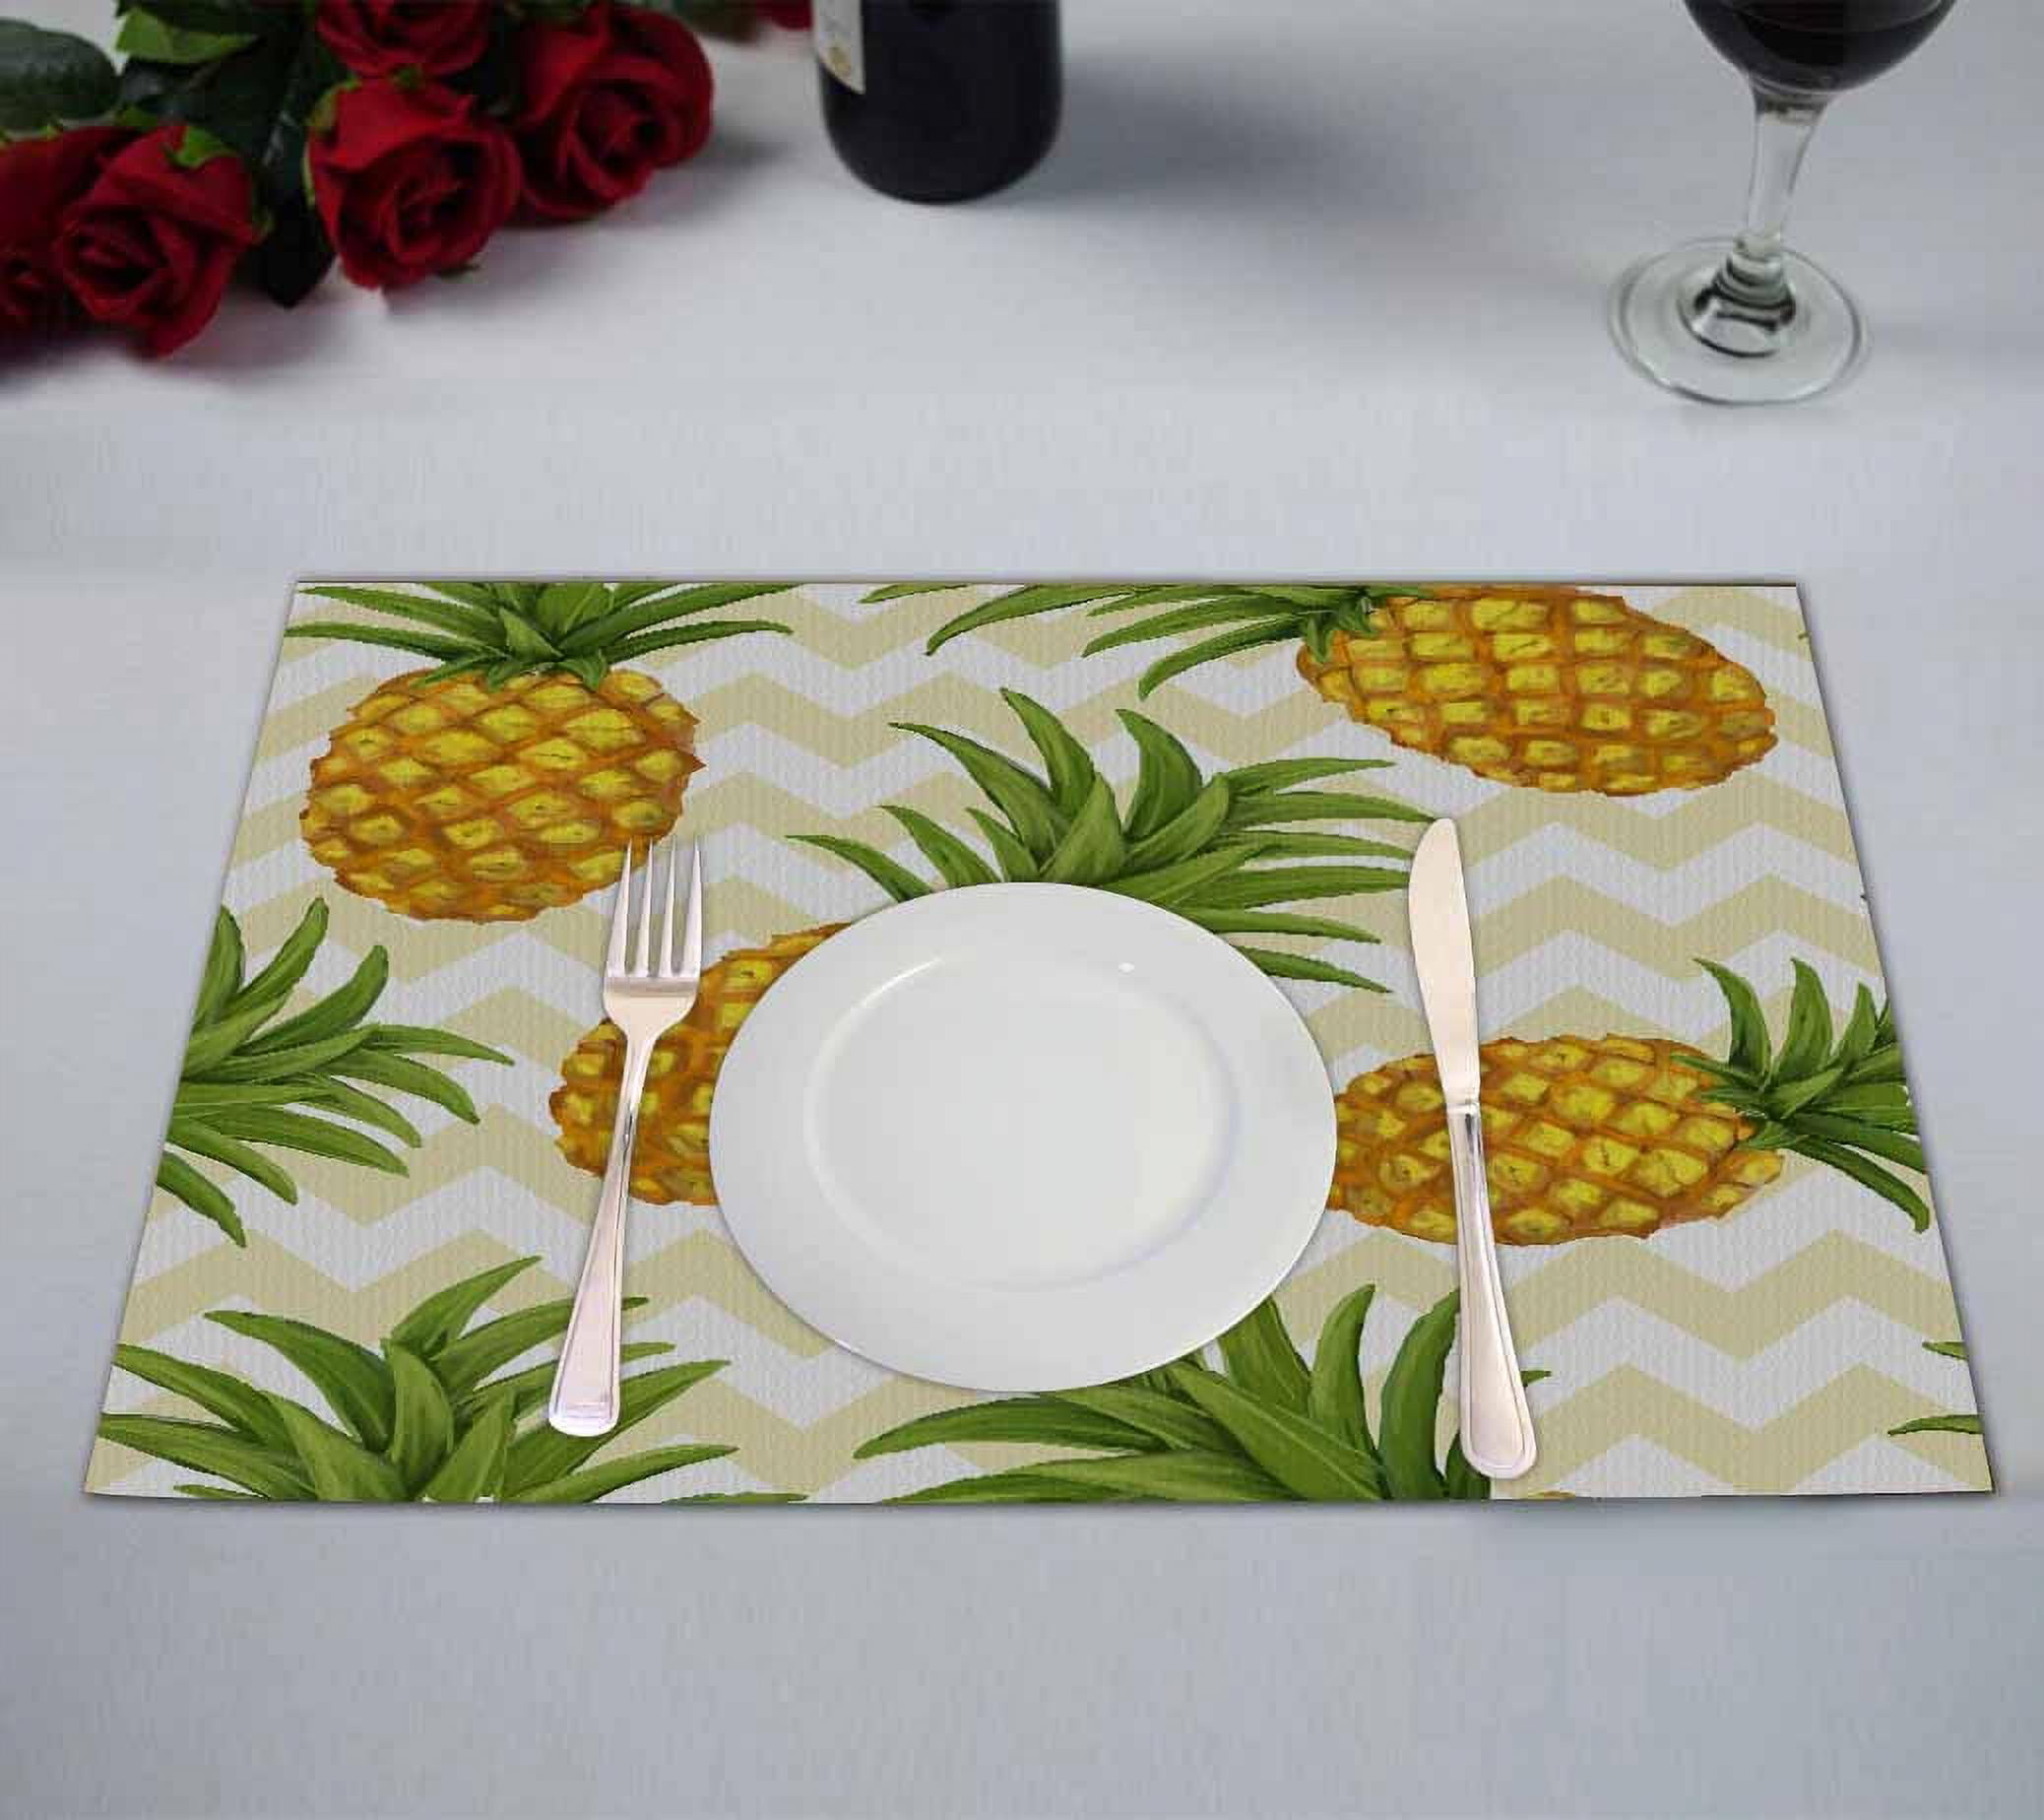 PKQWTM Hand Drawn Pineapple Kitchen Dining Table Mats Placemats Size ...